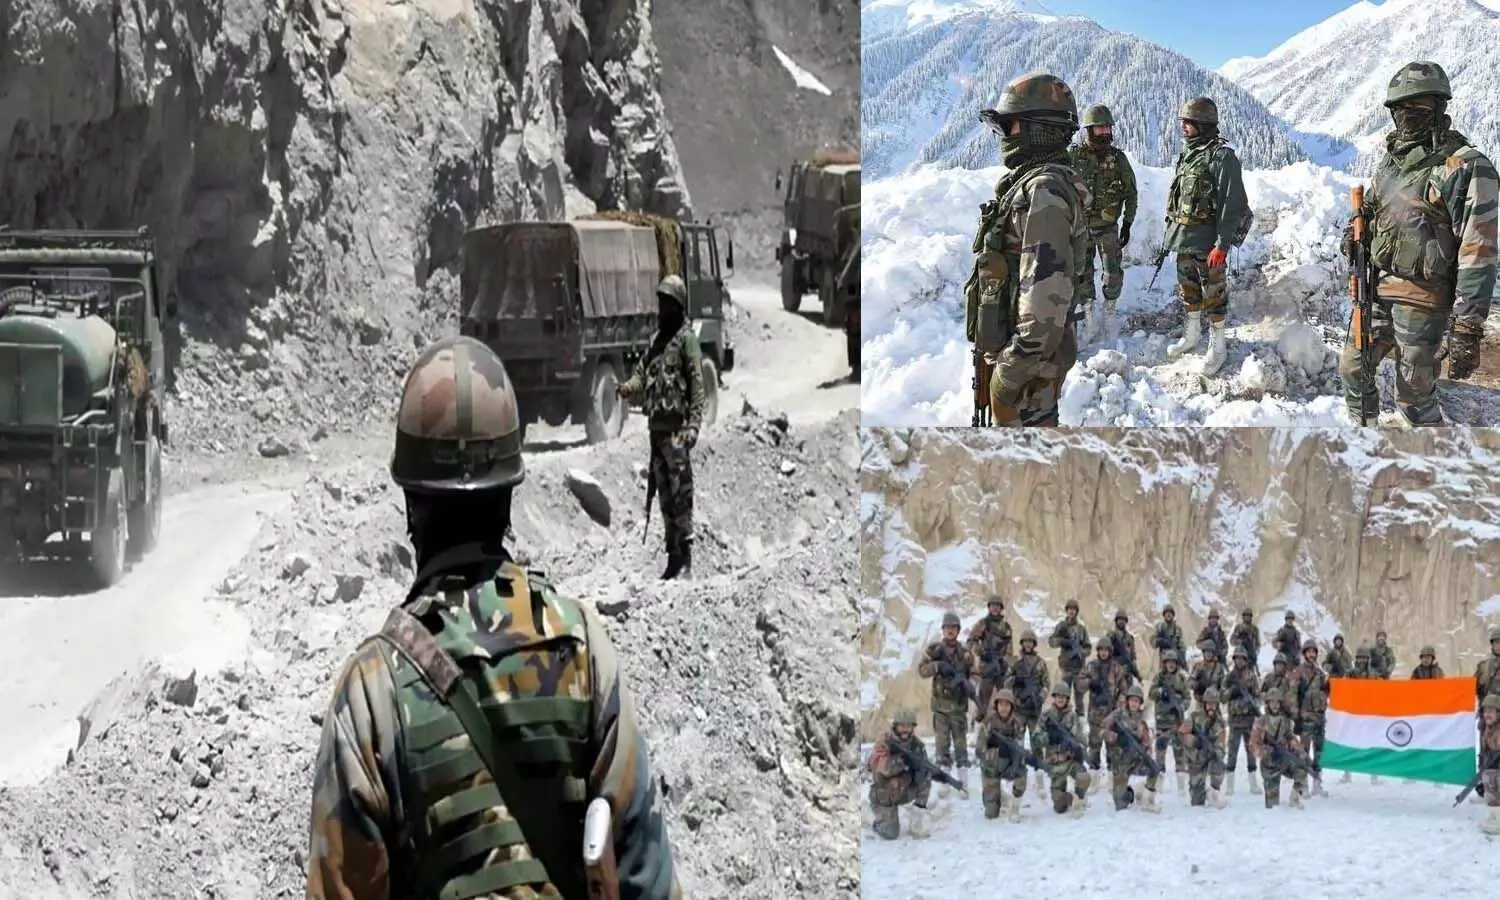 Alert on India-China border: Indian Army deployed troops, 6 divisions sent to China border